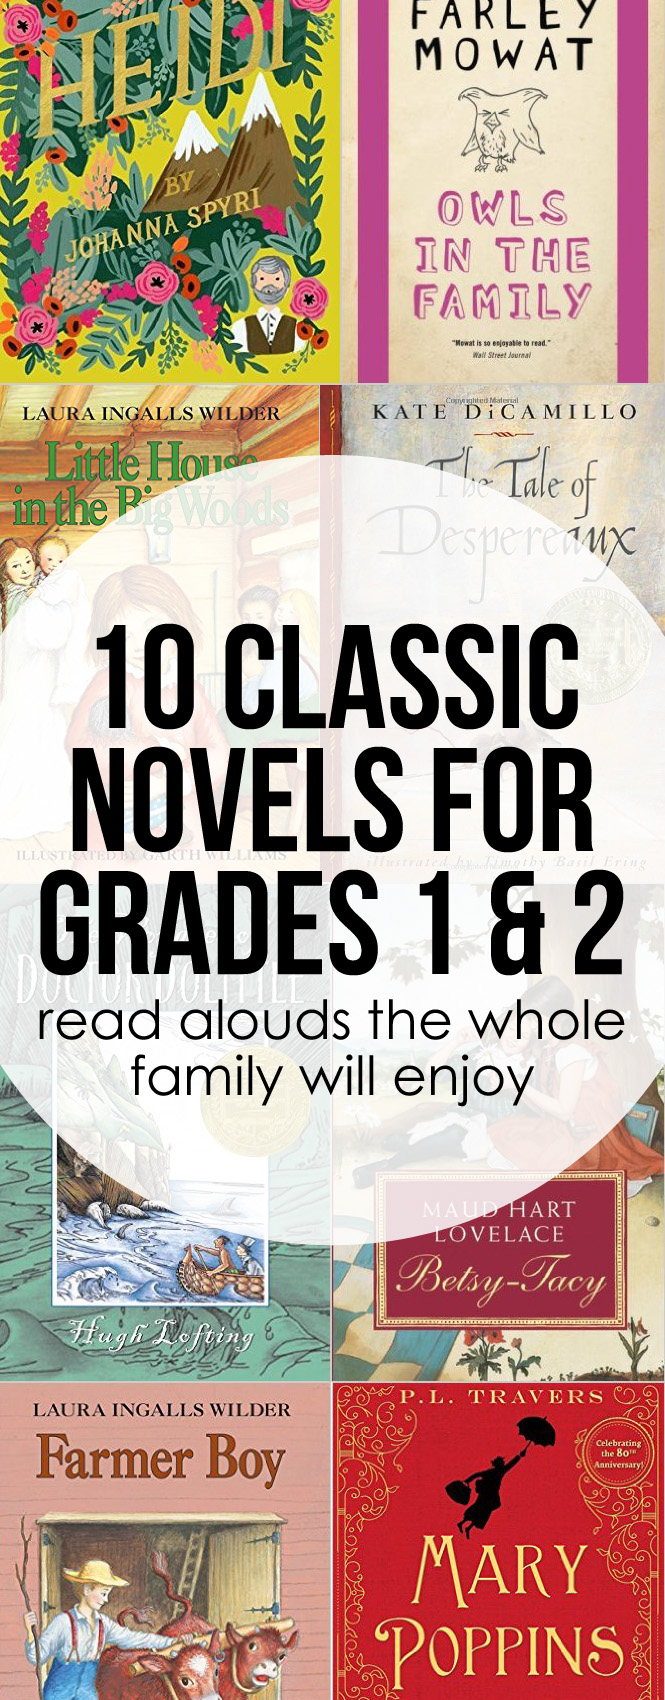 Classic books to read aloud with grade 1 and 2. They are truly classic novels the whole family will love.